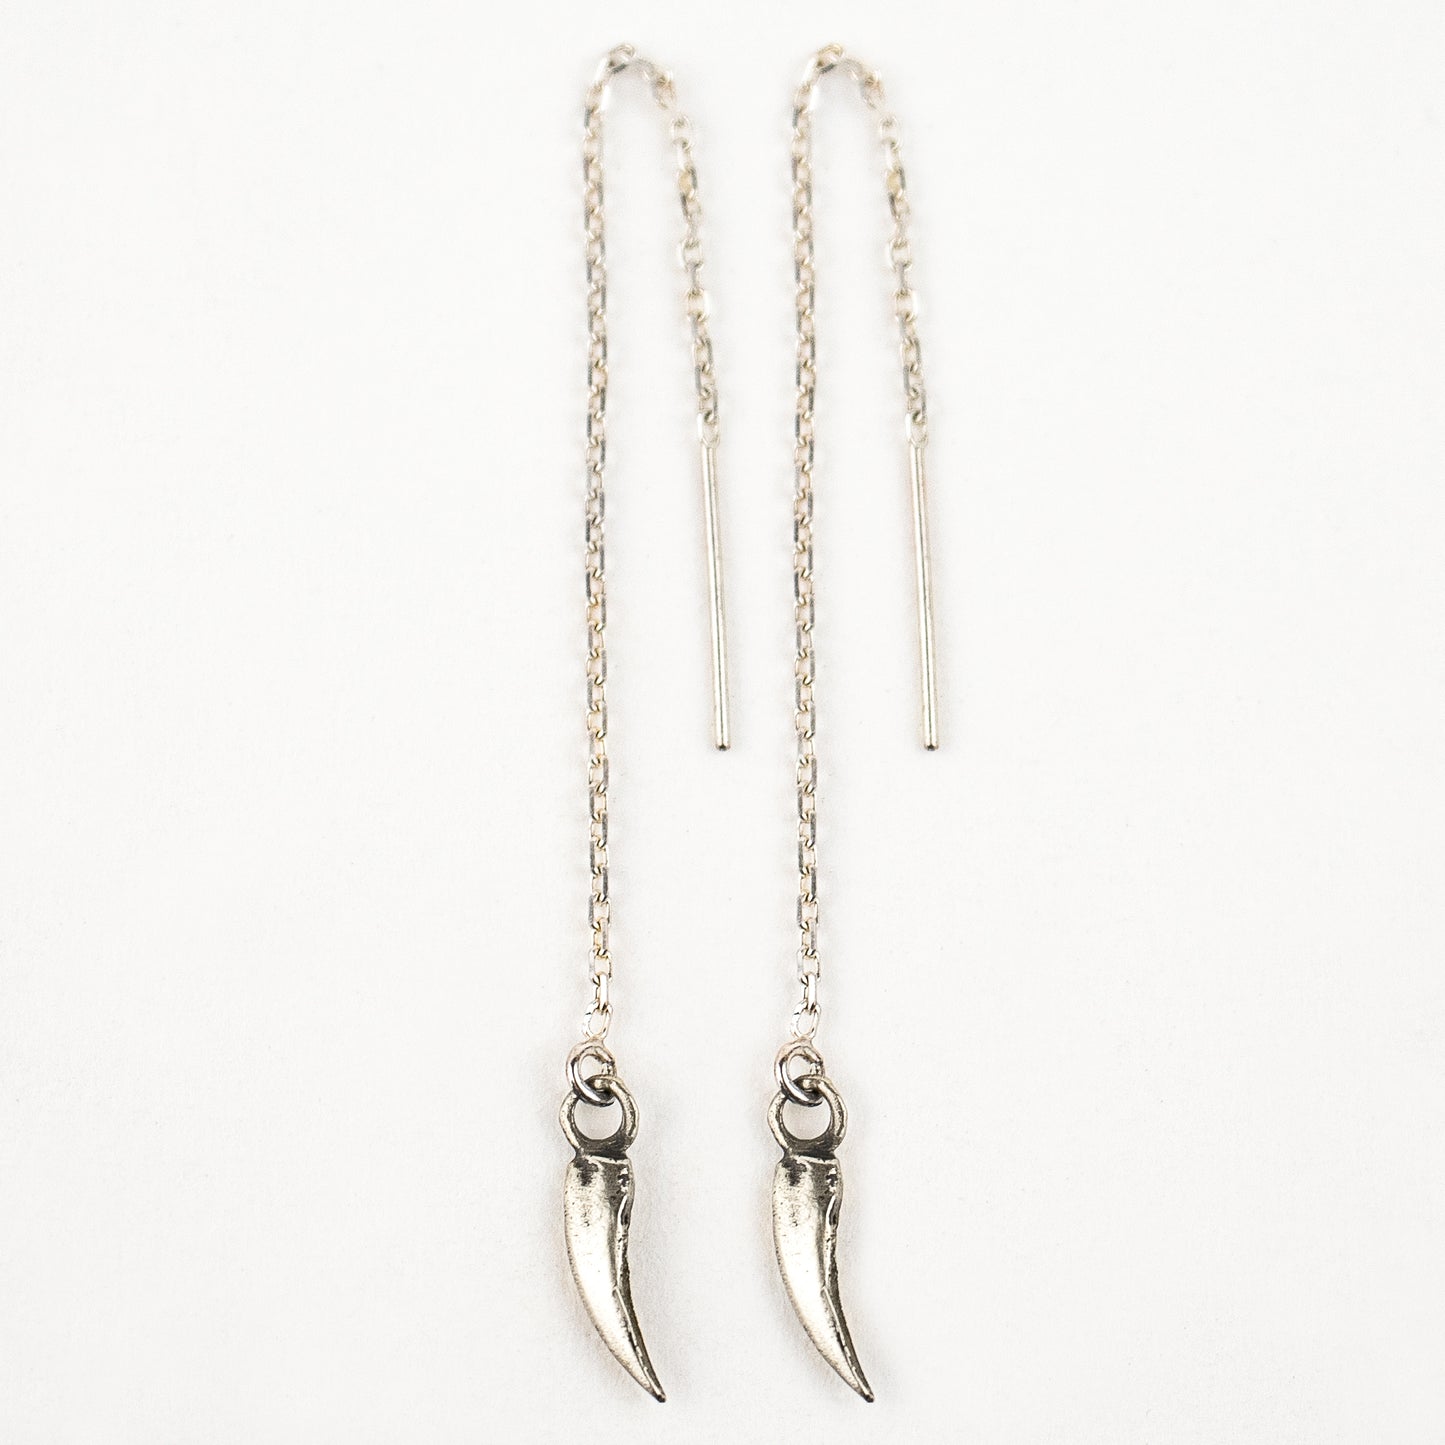 Solid reclaimed sterling silver claw charms on sterling fine-chain threaders handmade and finished in our Catskills store-studio and available as singles to mix-and-match.